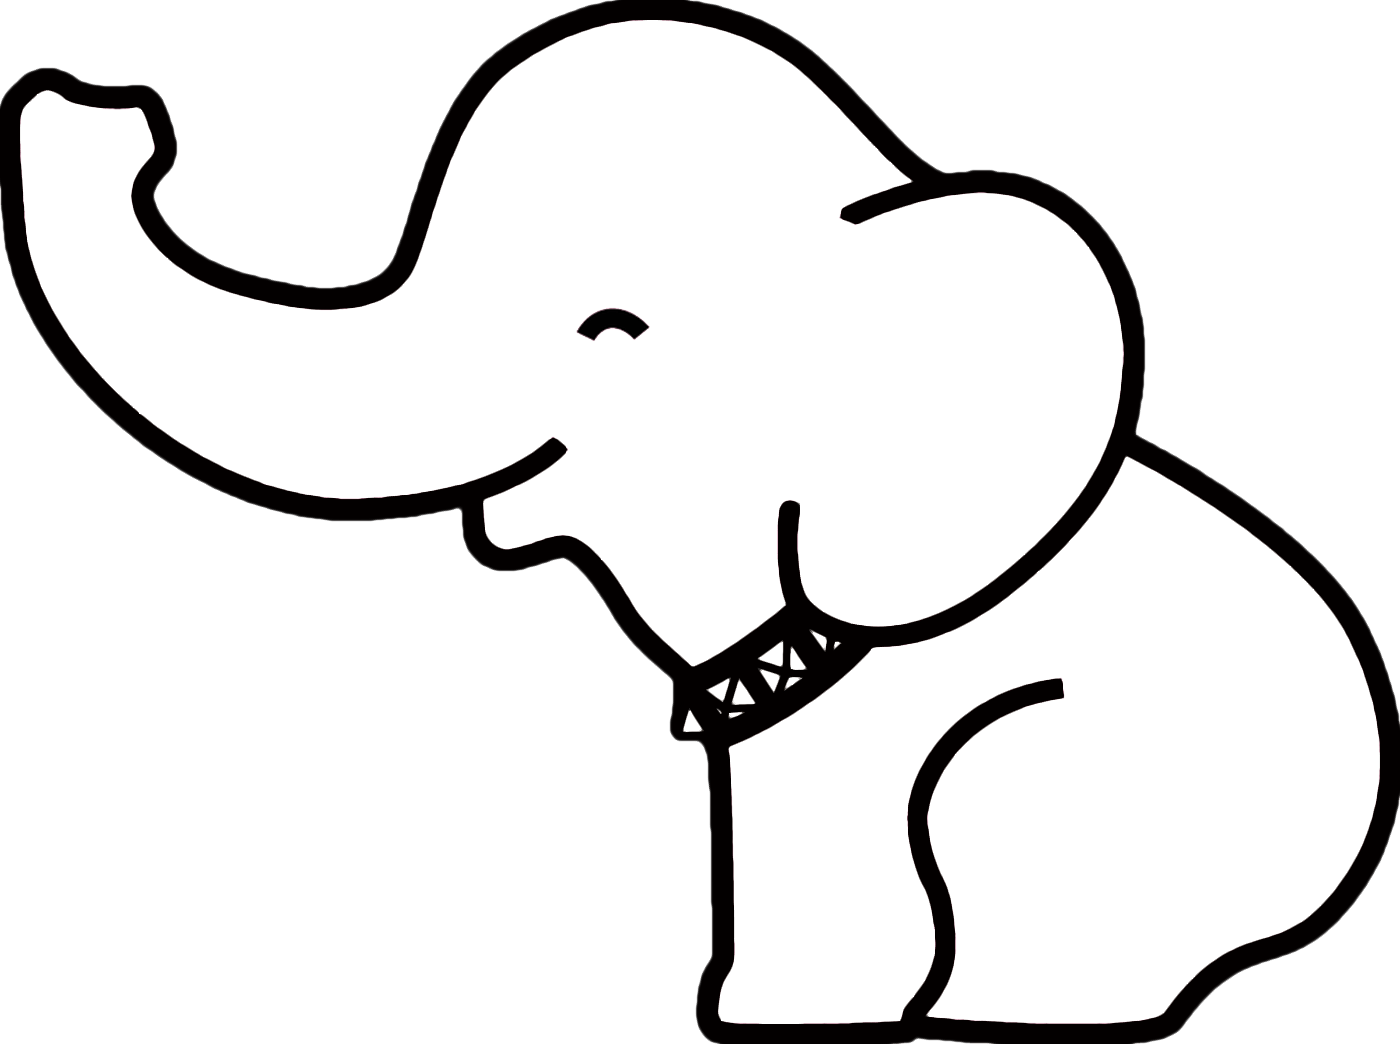 Free Elephant Outline Cliparts, Download Free Elephant Outline Cliparts